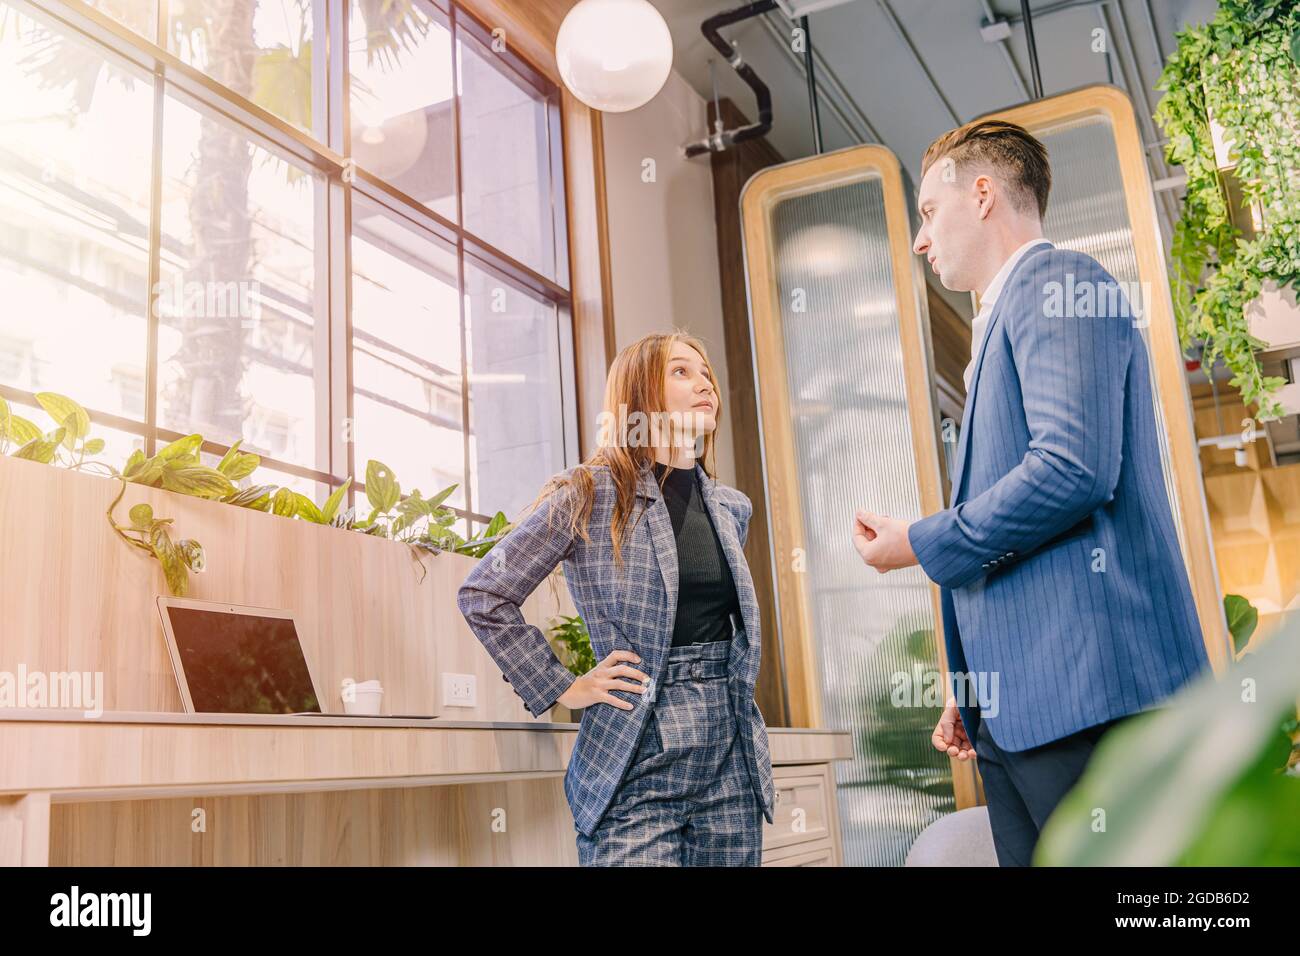 Businesspeople talking together in modern office green plant decoration for business contact or connection meeting. Stock Photo